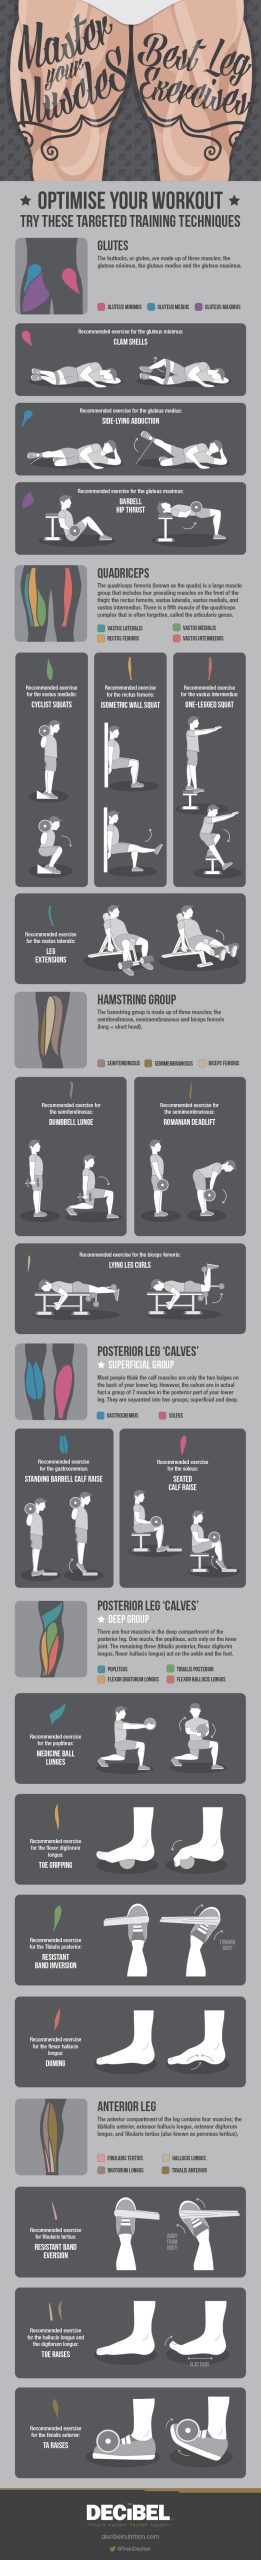 Master Your Muscles: Best Leg Exercises #infographic